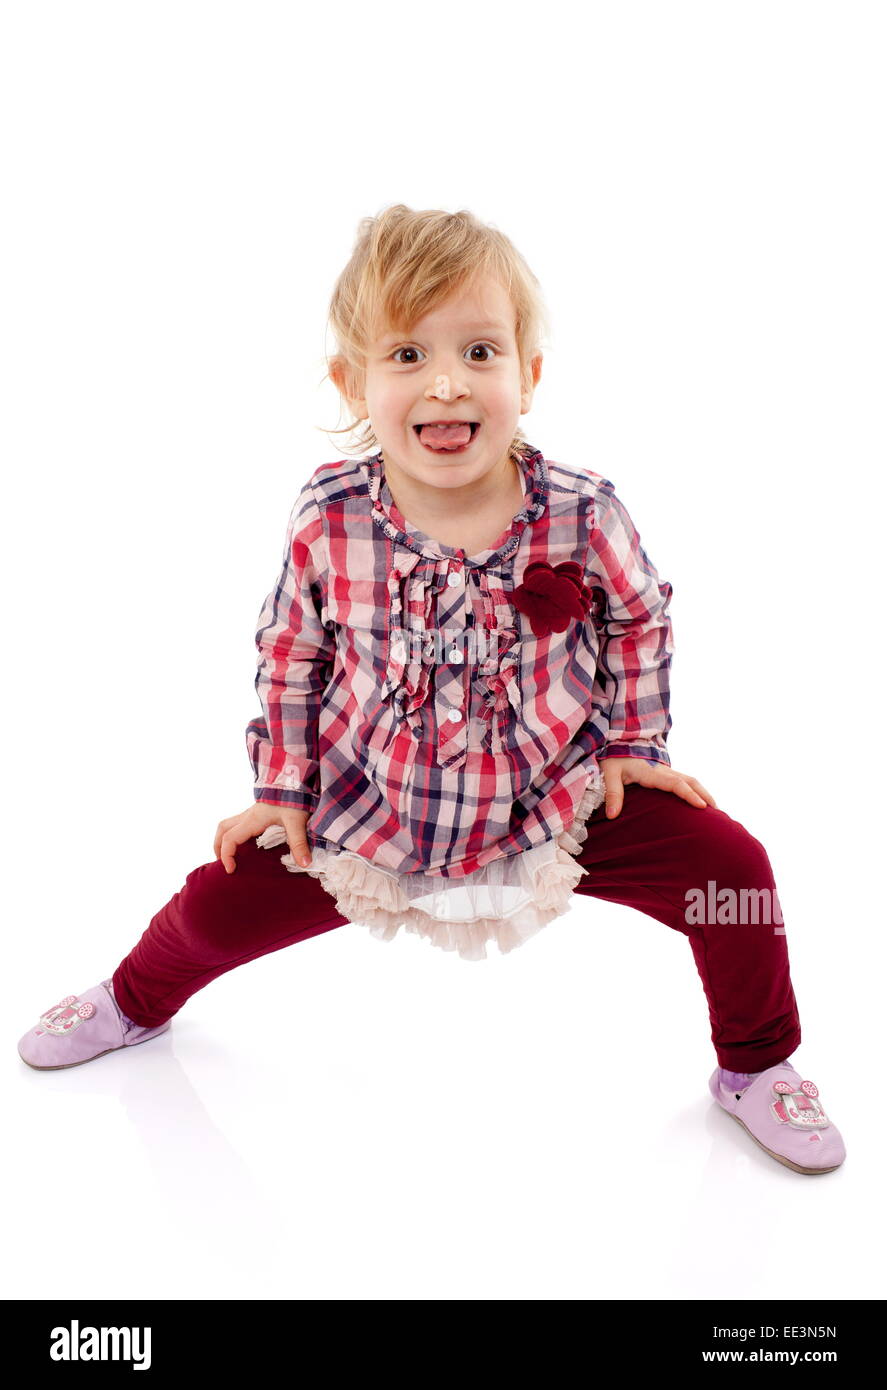 Little girl playing and having fun showing her tongue Stock Photo